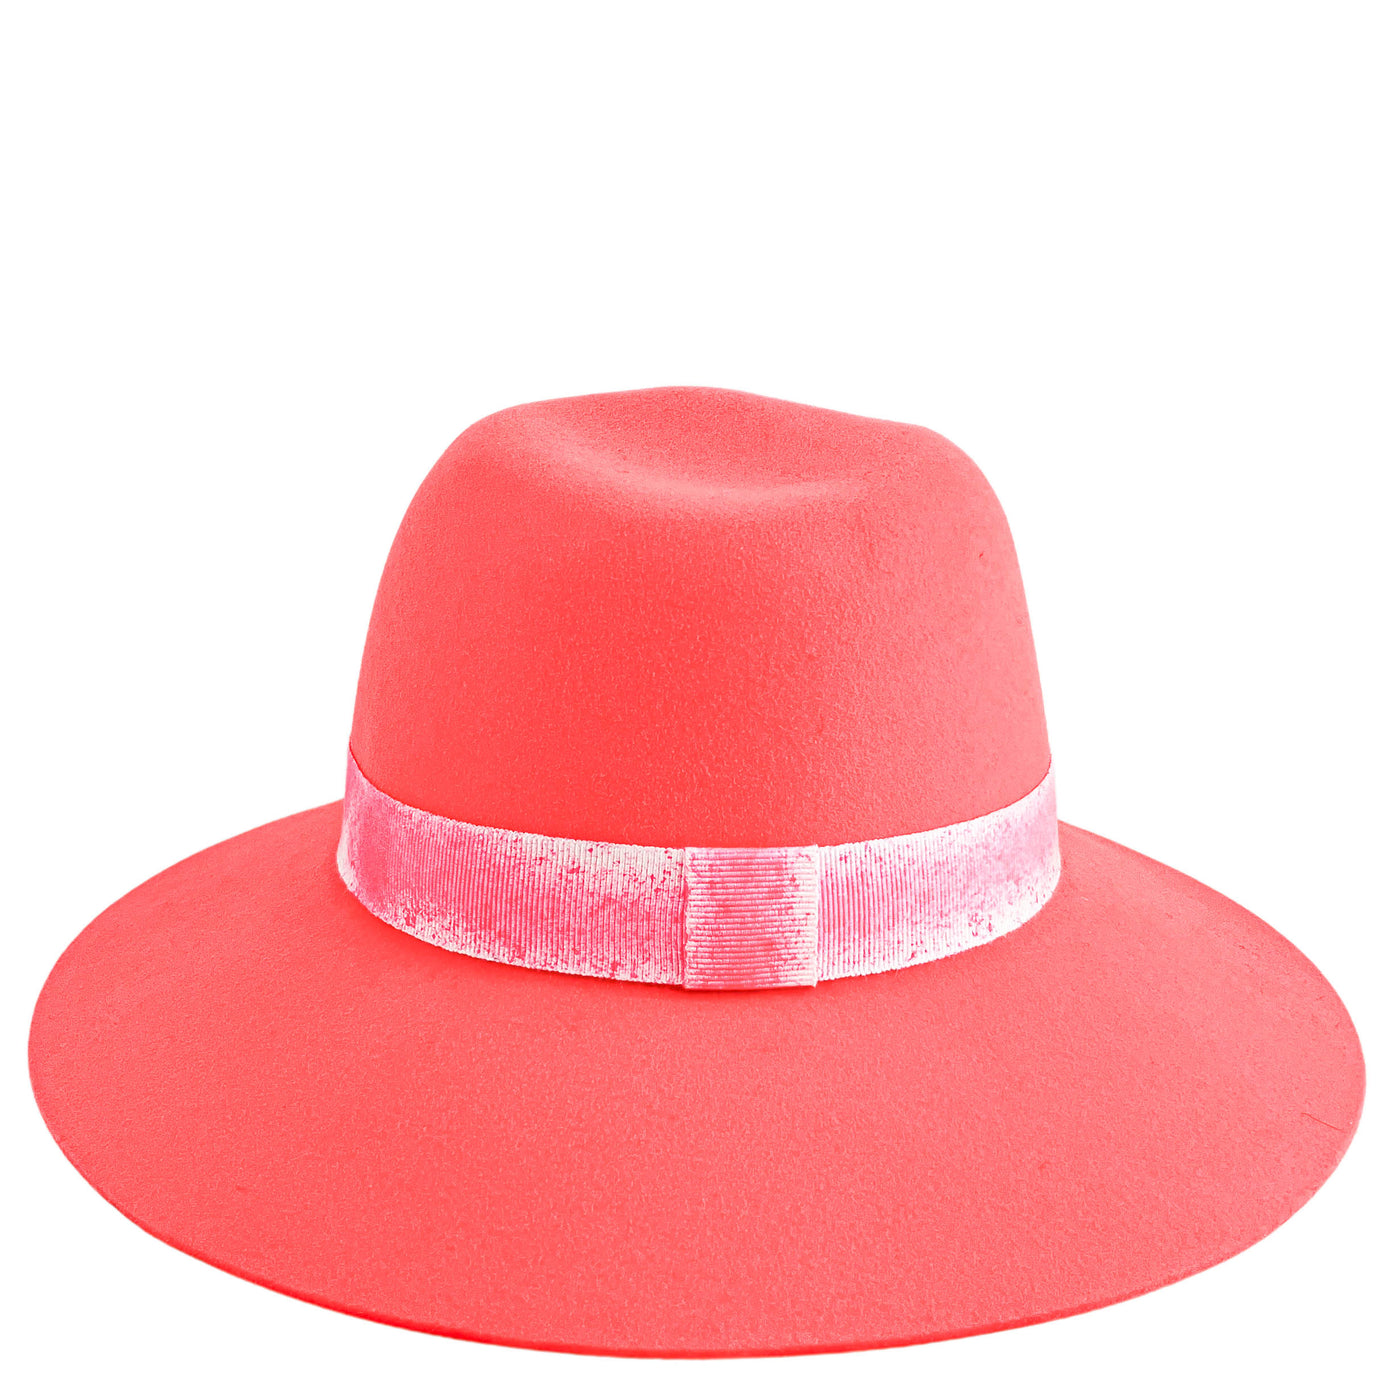 Masion Michel Kyra Felted Fedora Hat in Coral Pink - Discounts on Maison Michel at UAL